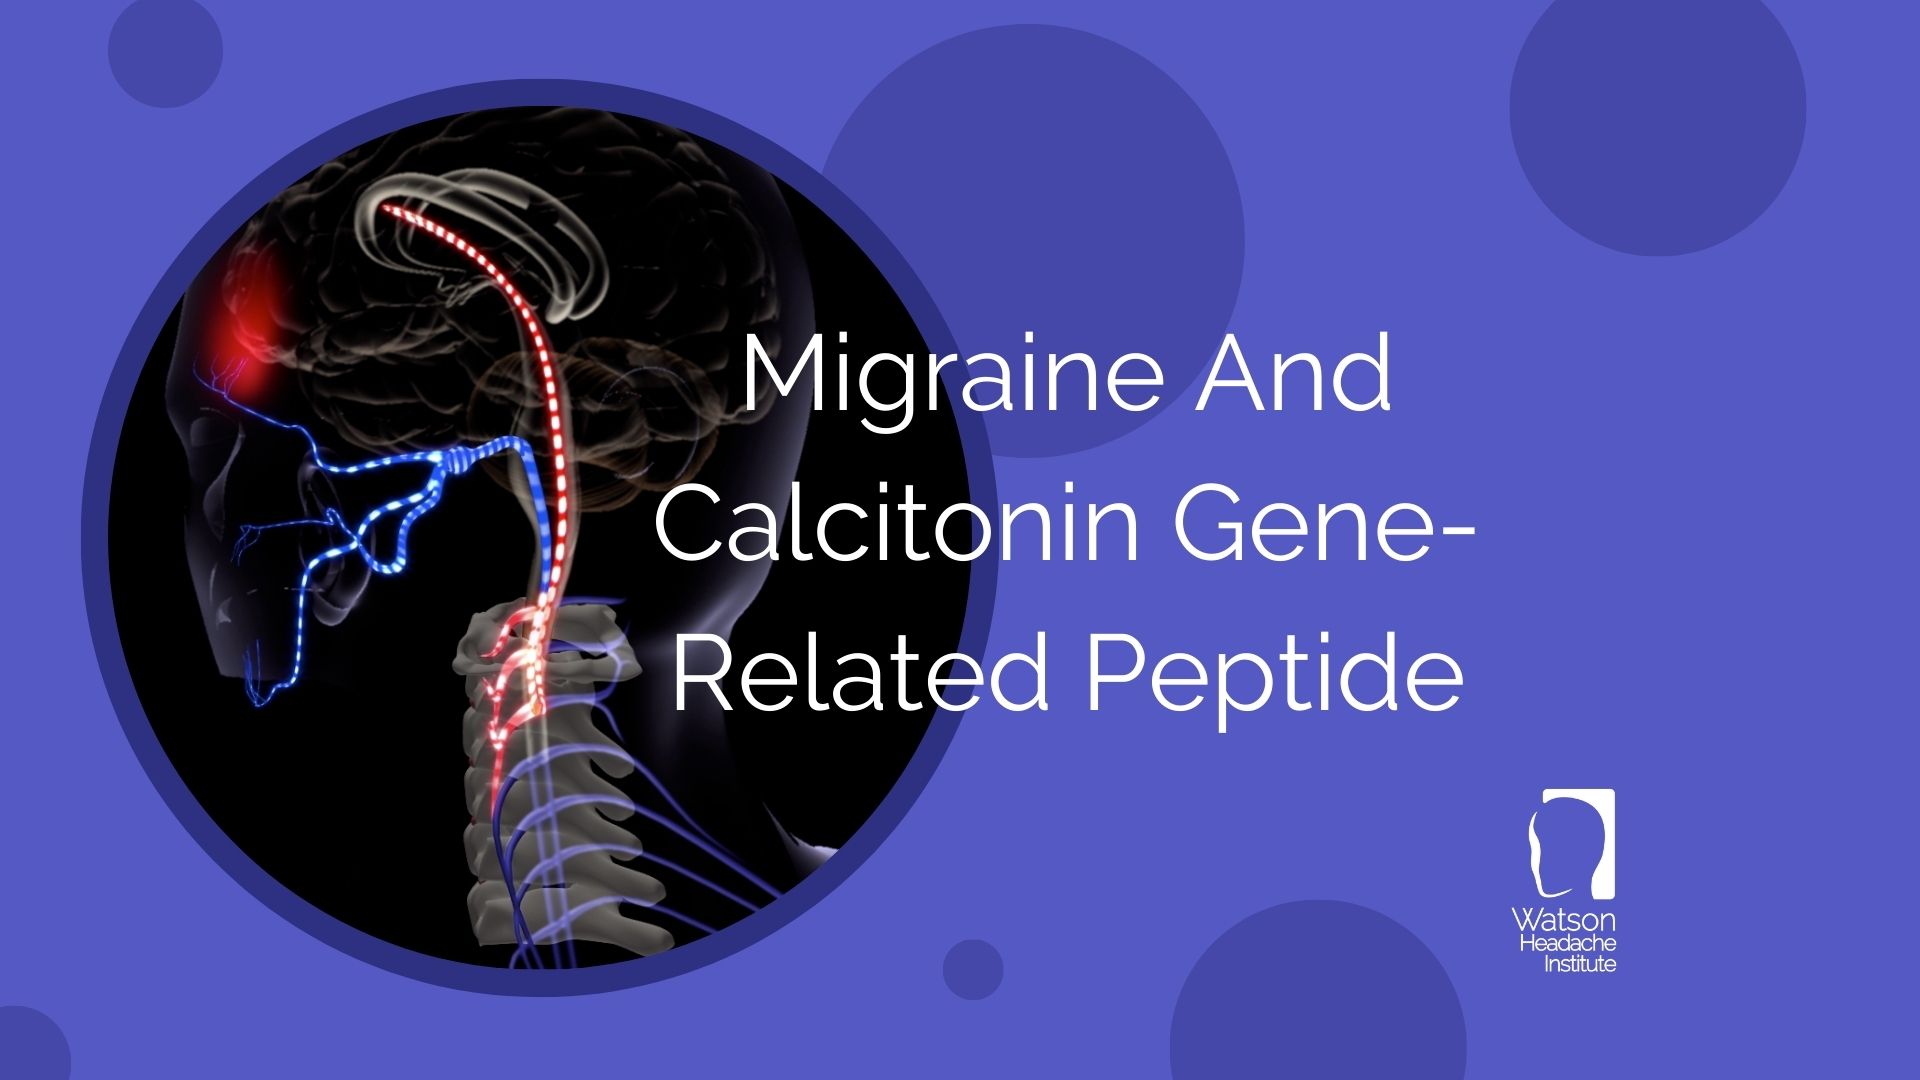 Commentary - Migraine And Calcitonin Gene Related Peptide